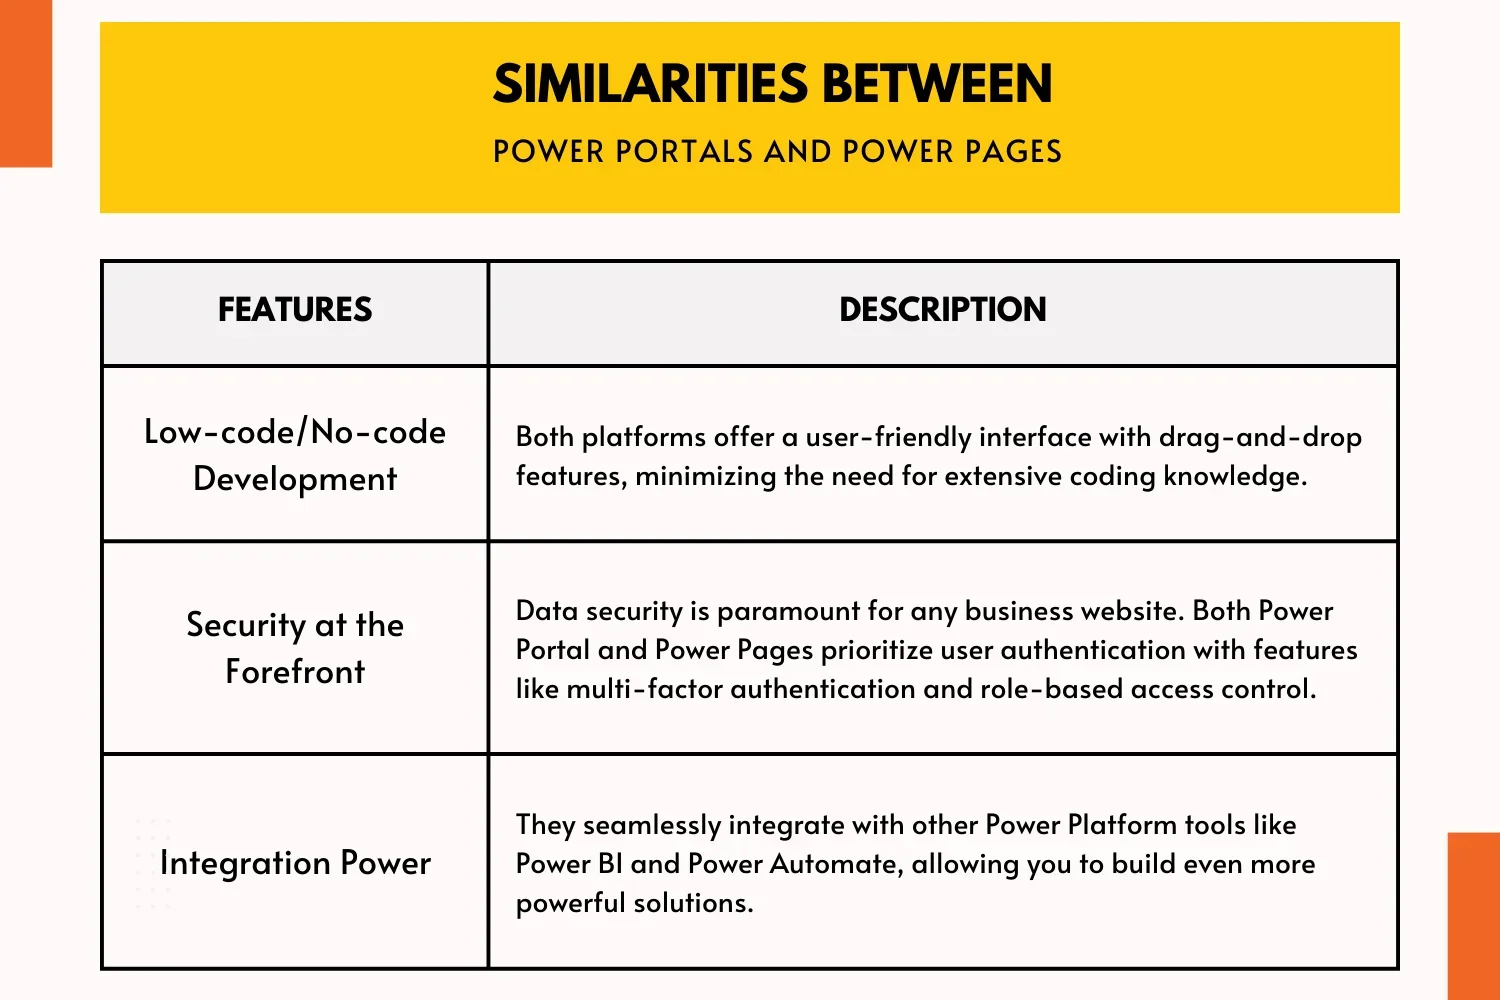 Similarities Between Power Portals and Power Pages